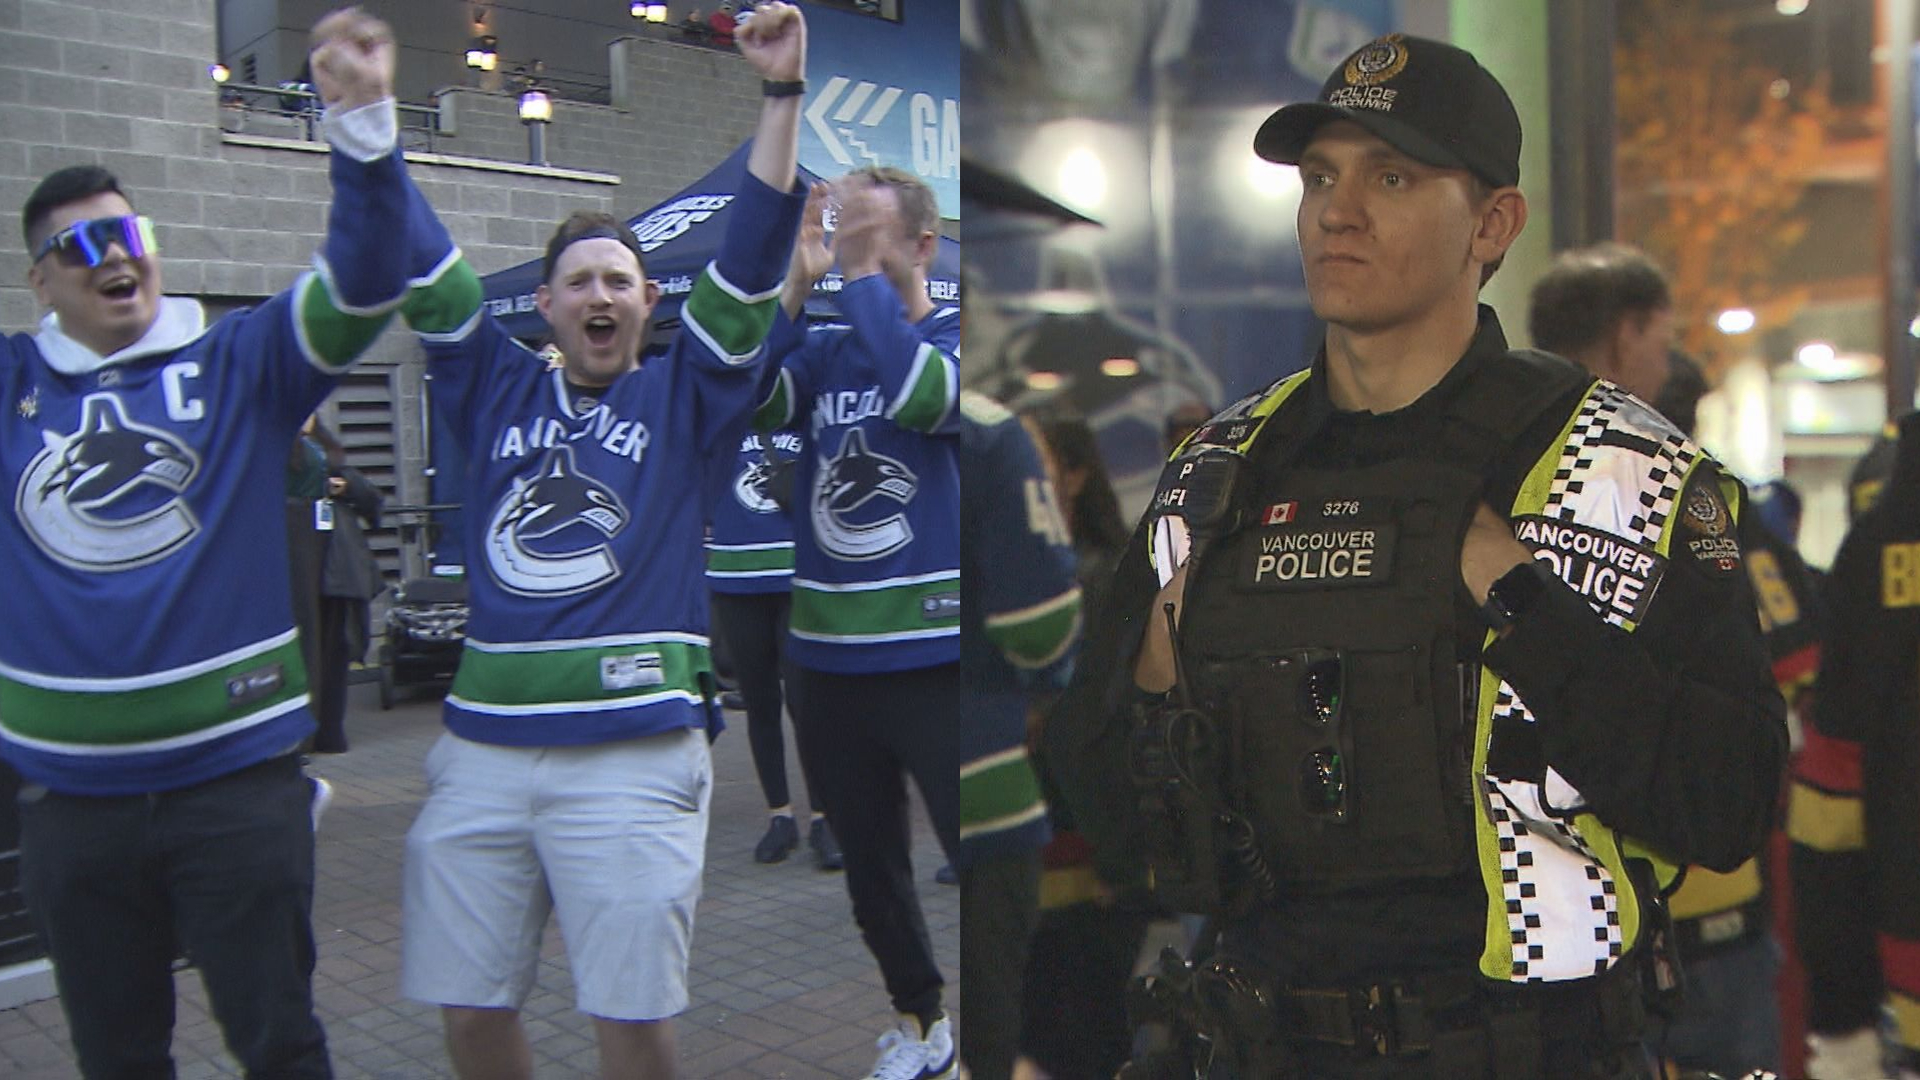 Previous riots to blame for no Canucks outdoor watch parties: Vancouver Mayor